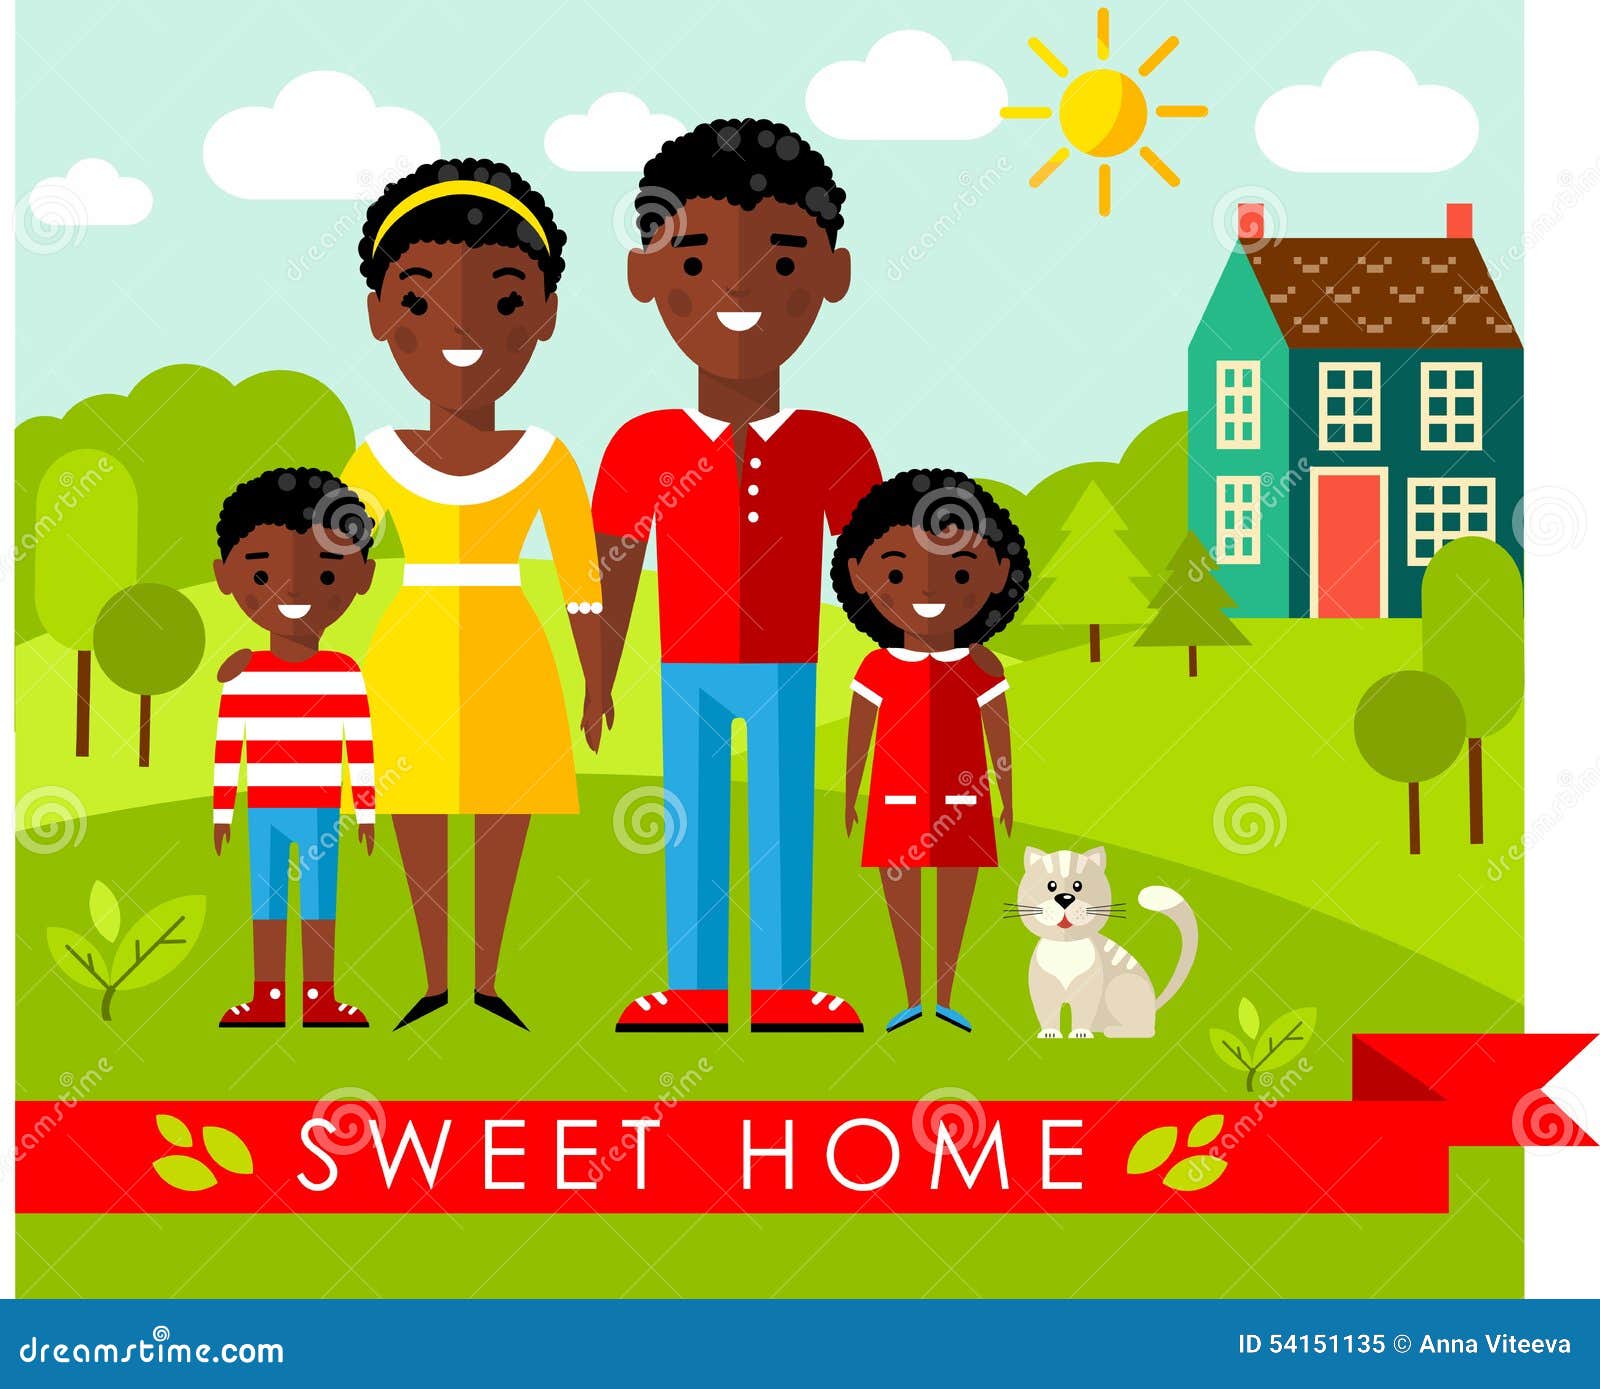 clipart african american family - photo #15